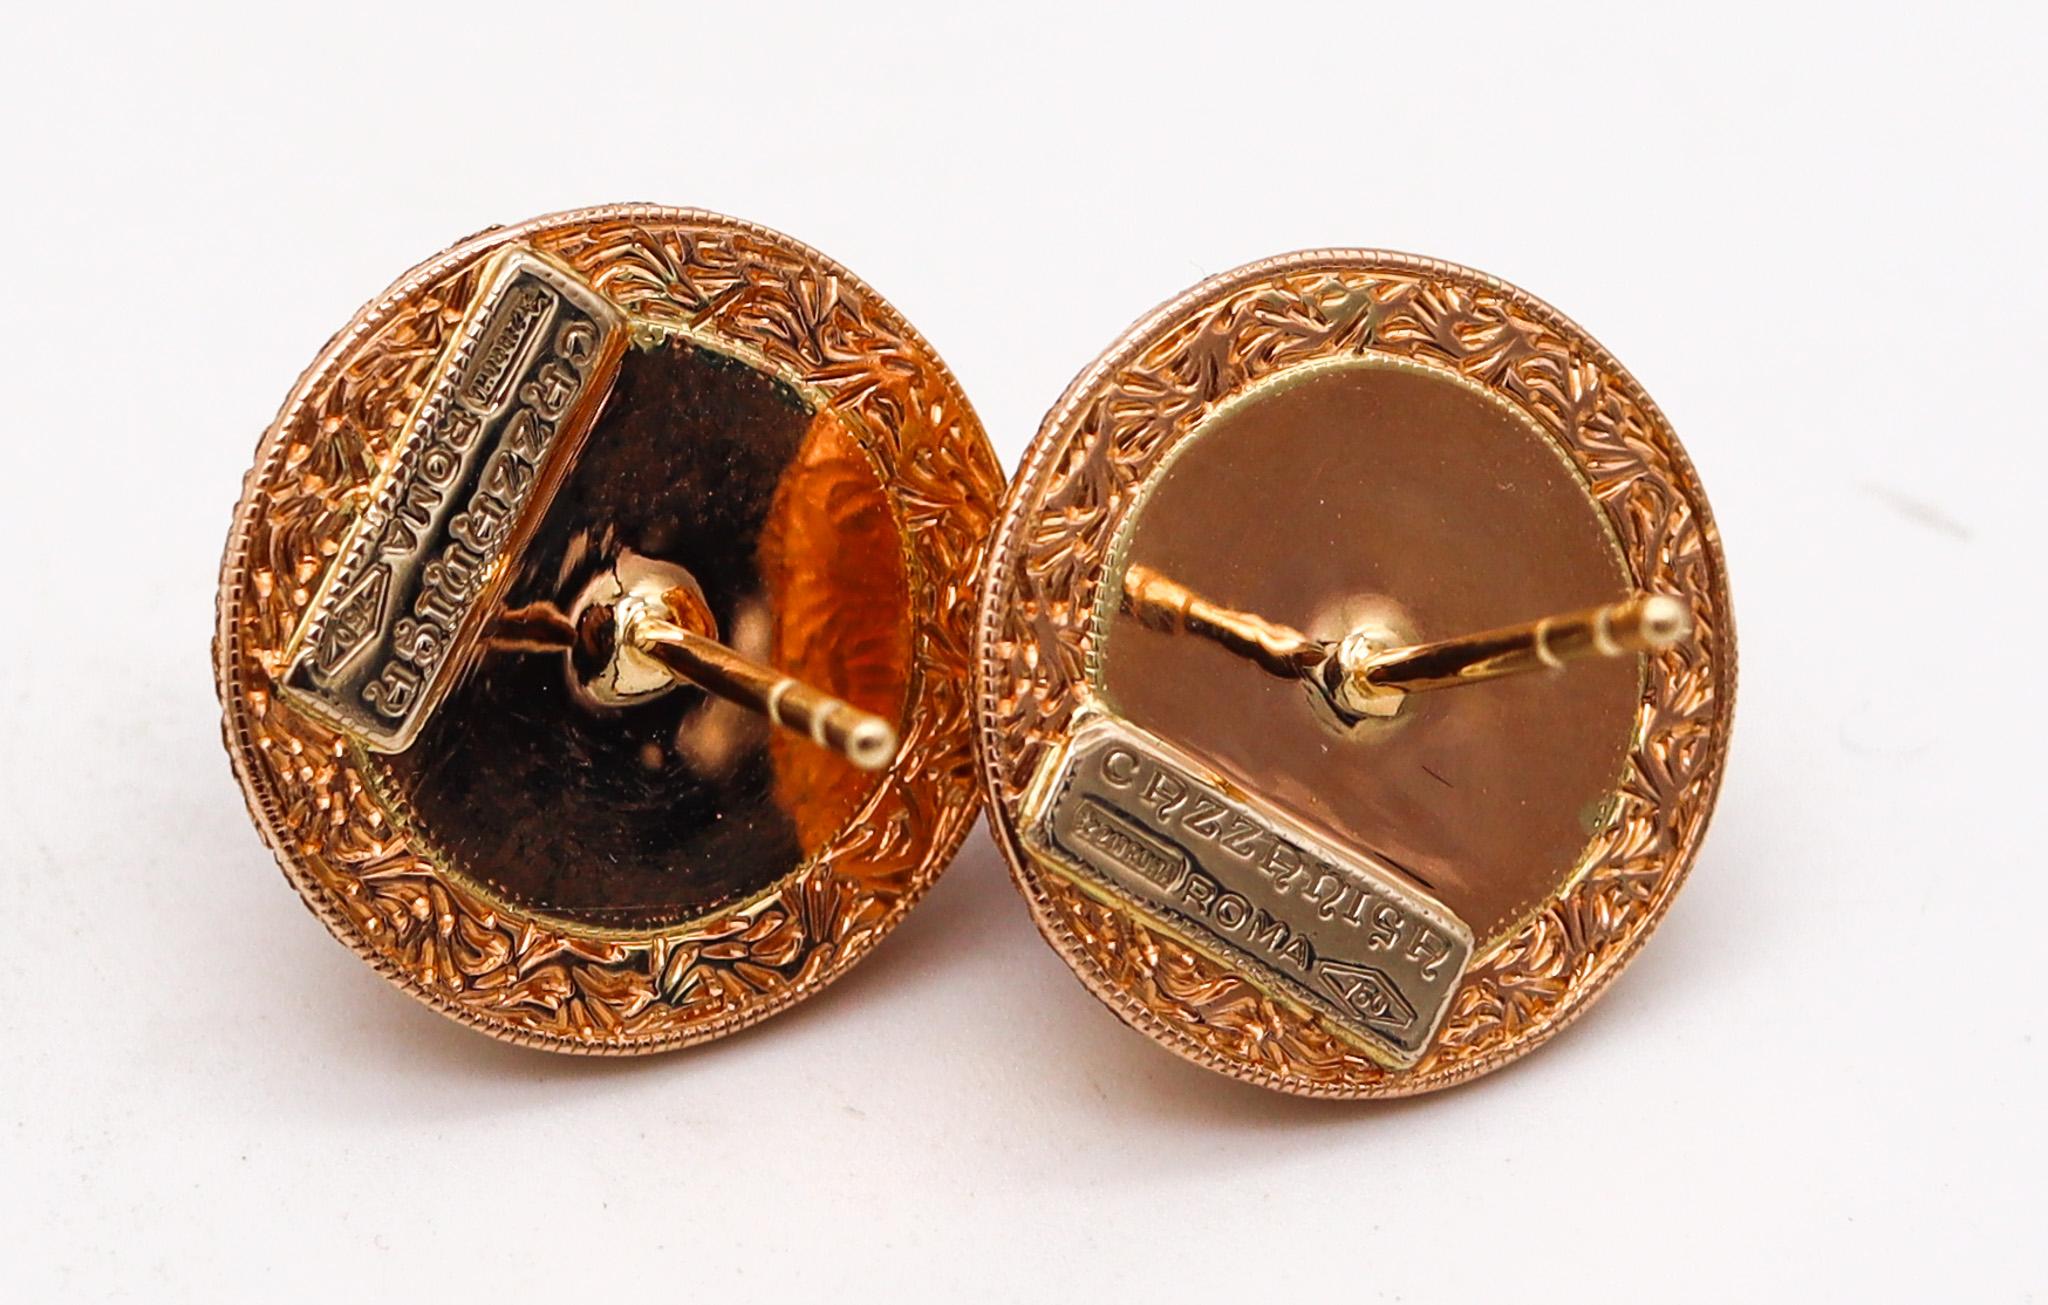 Cabochon Cazzaniga Roma 1970 Studs Earrings In 18Kt Yellow Gold With 13.5 Ctw Carnelians